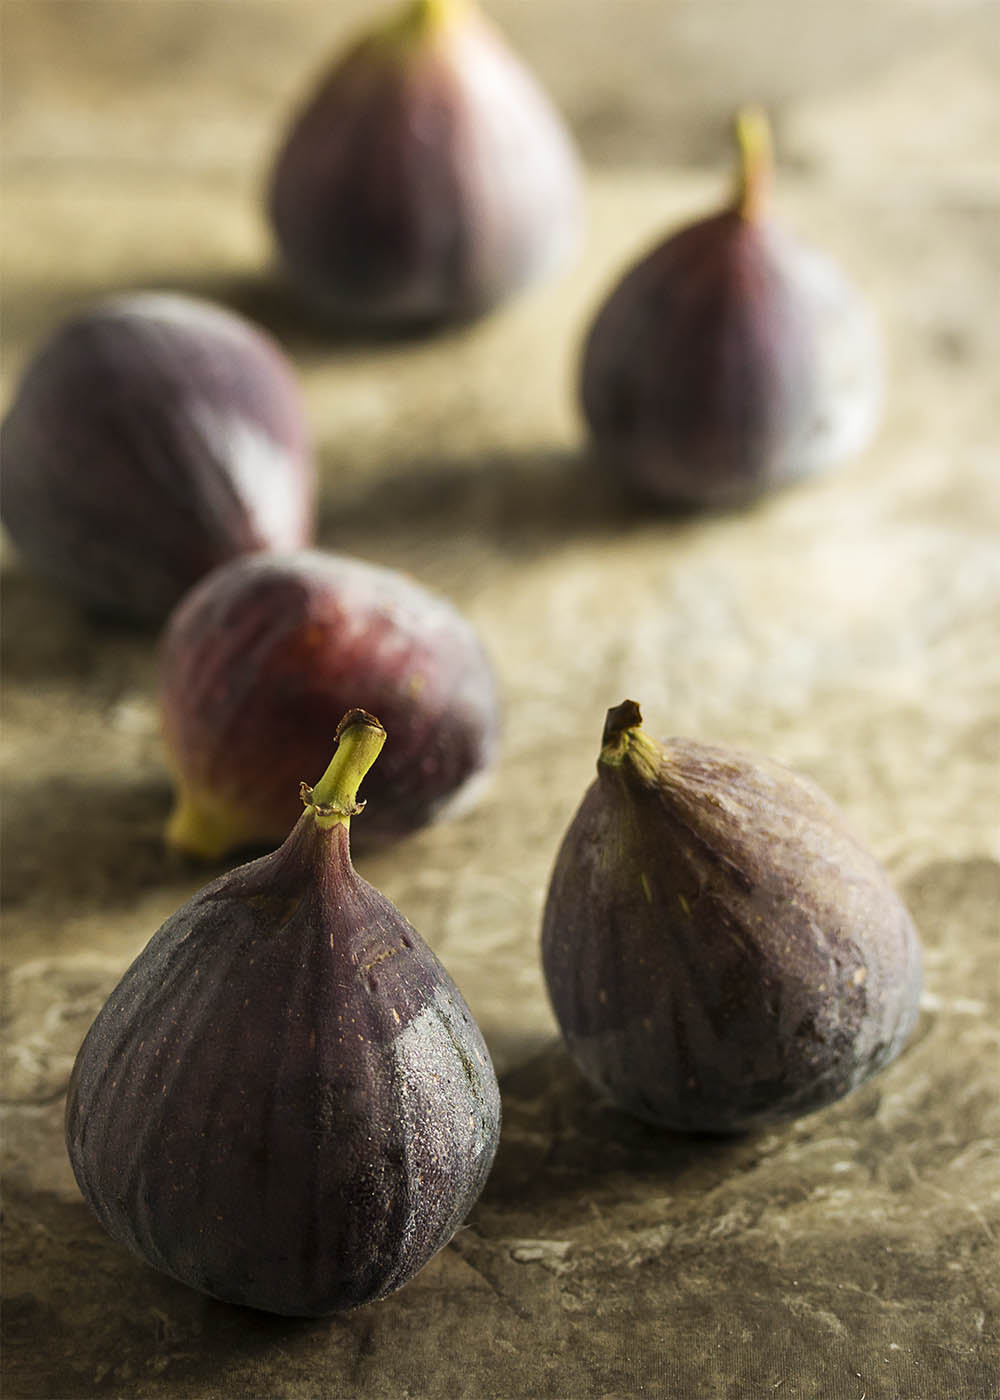 Sweet, soft, and juicy fresh figs are great in both sweet and savory dishes. Check out this ingredient spotlight to learn all about them! | justalittlebitofbacon.com